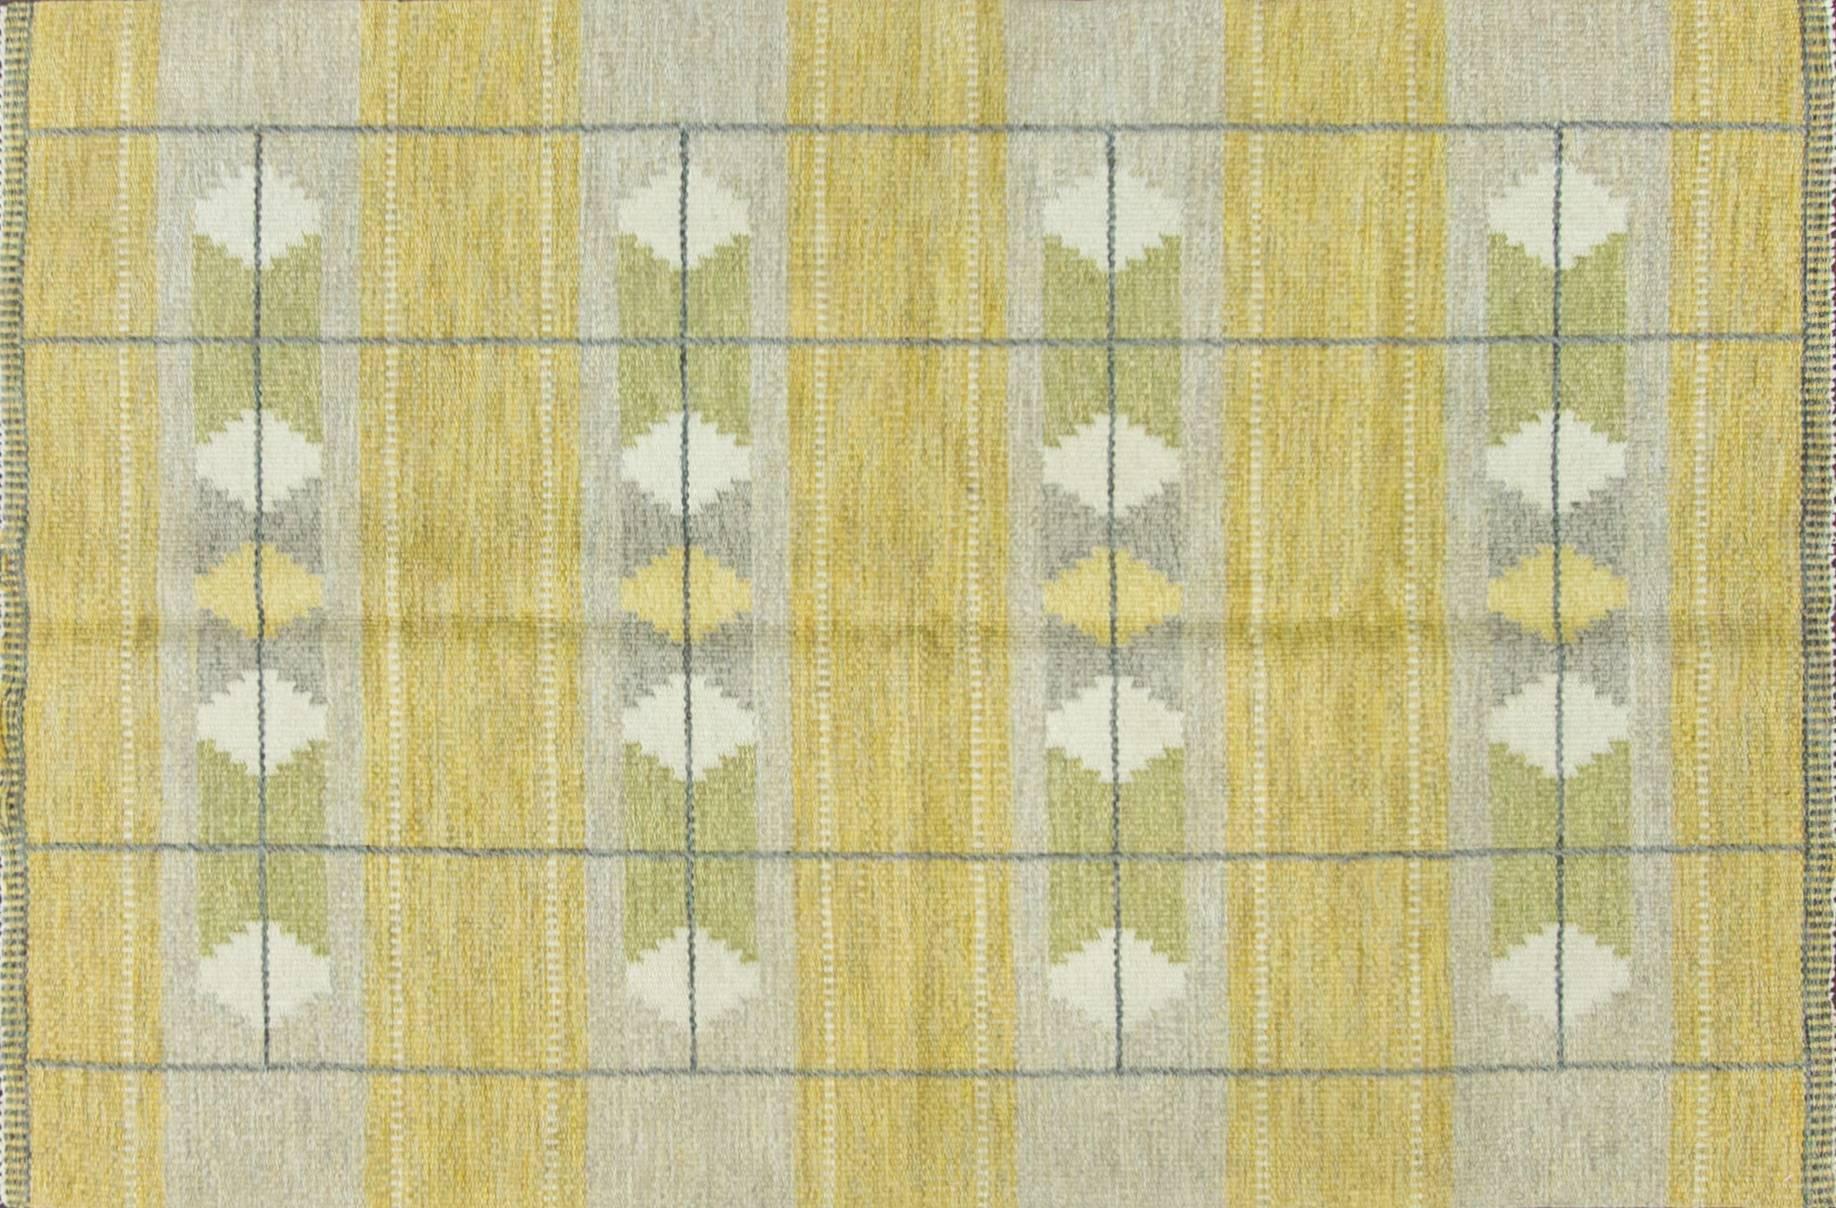 Incredible Swedish Kilim, vintage. A fine modern design by one of the leading carpet designers who moved away from traditional carpets during the 1940s-1950s. Measure: 4'4